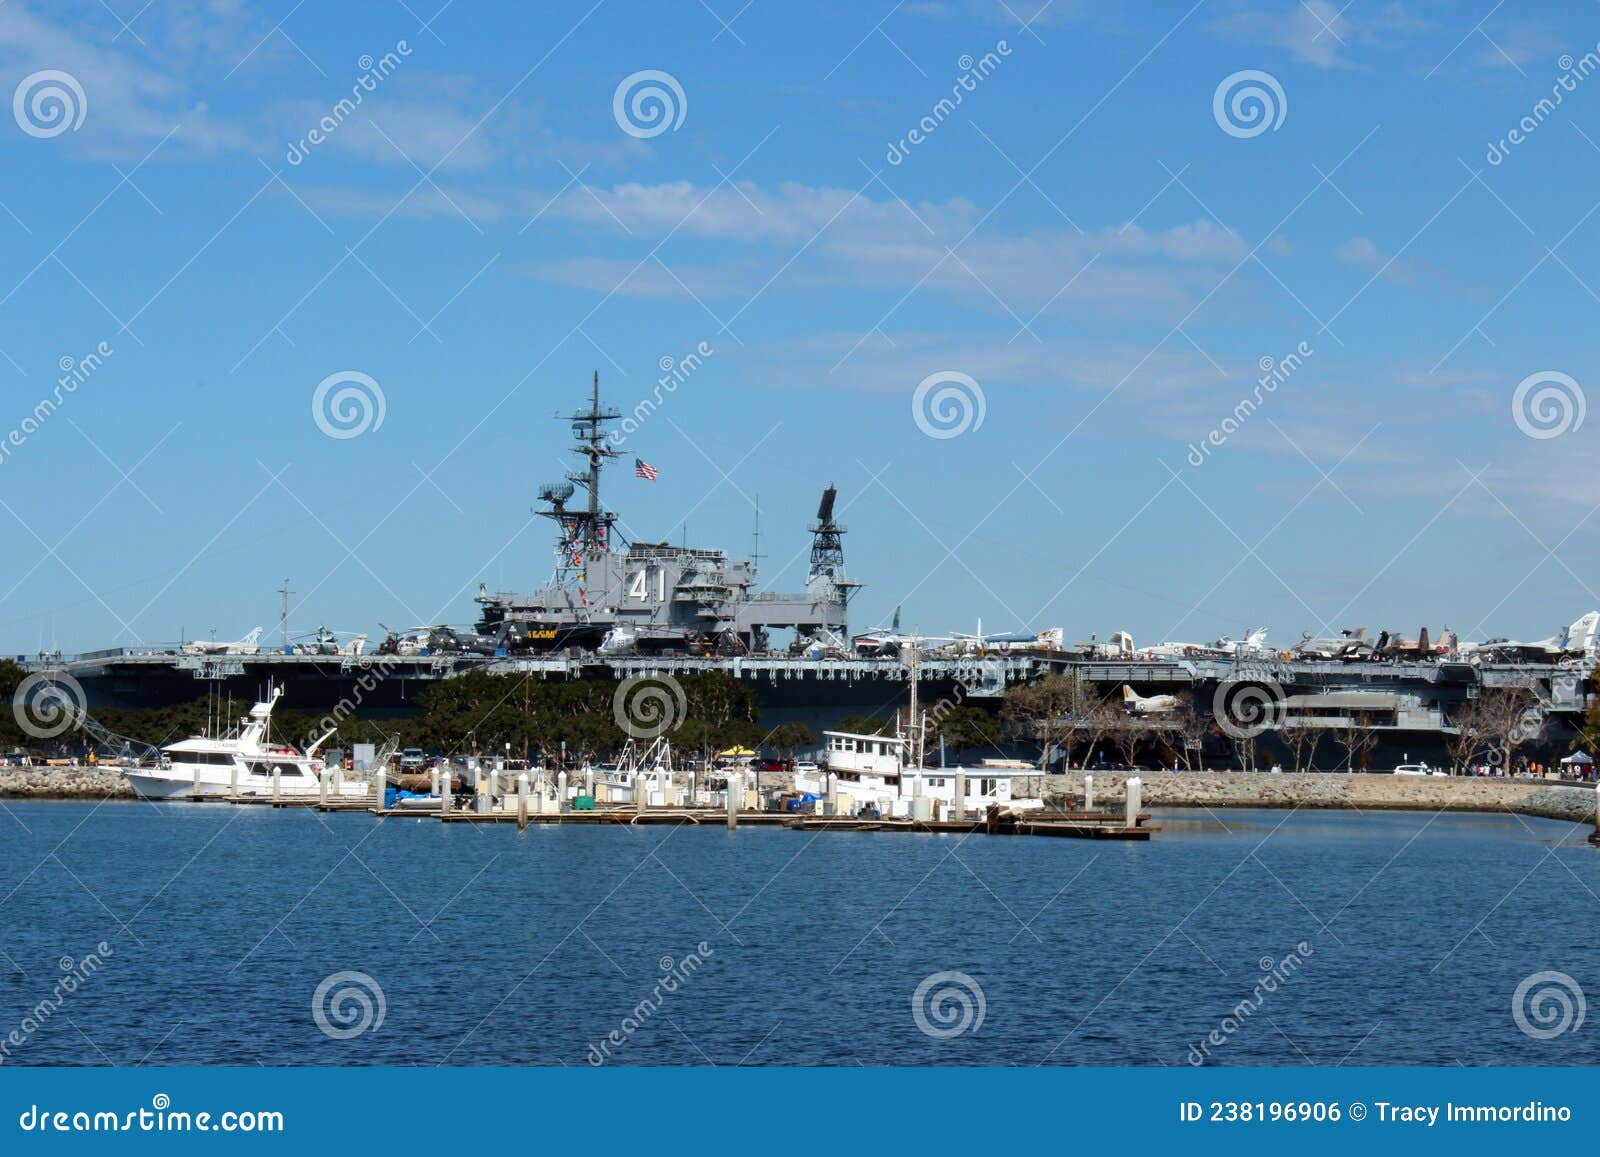 The USS Midway Aircraft Carrier and Fishing Boats at Navy Pier in